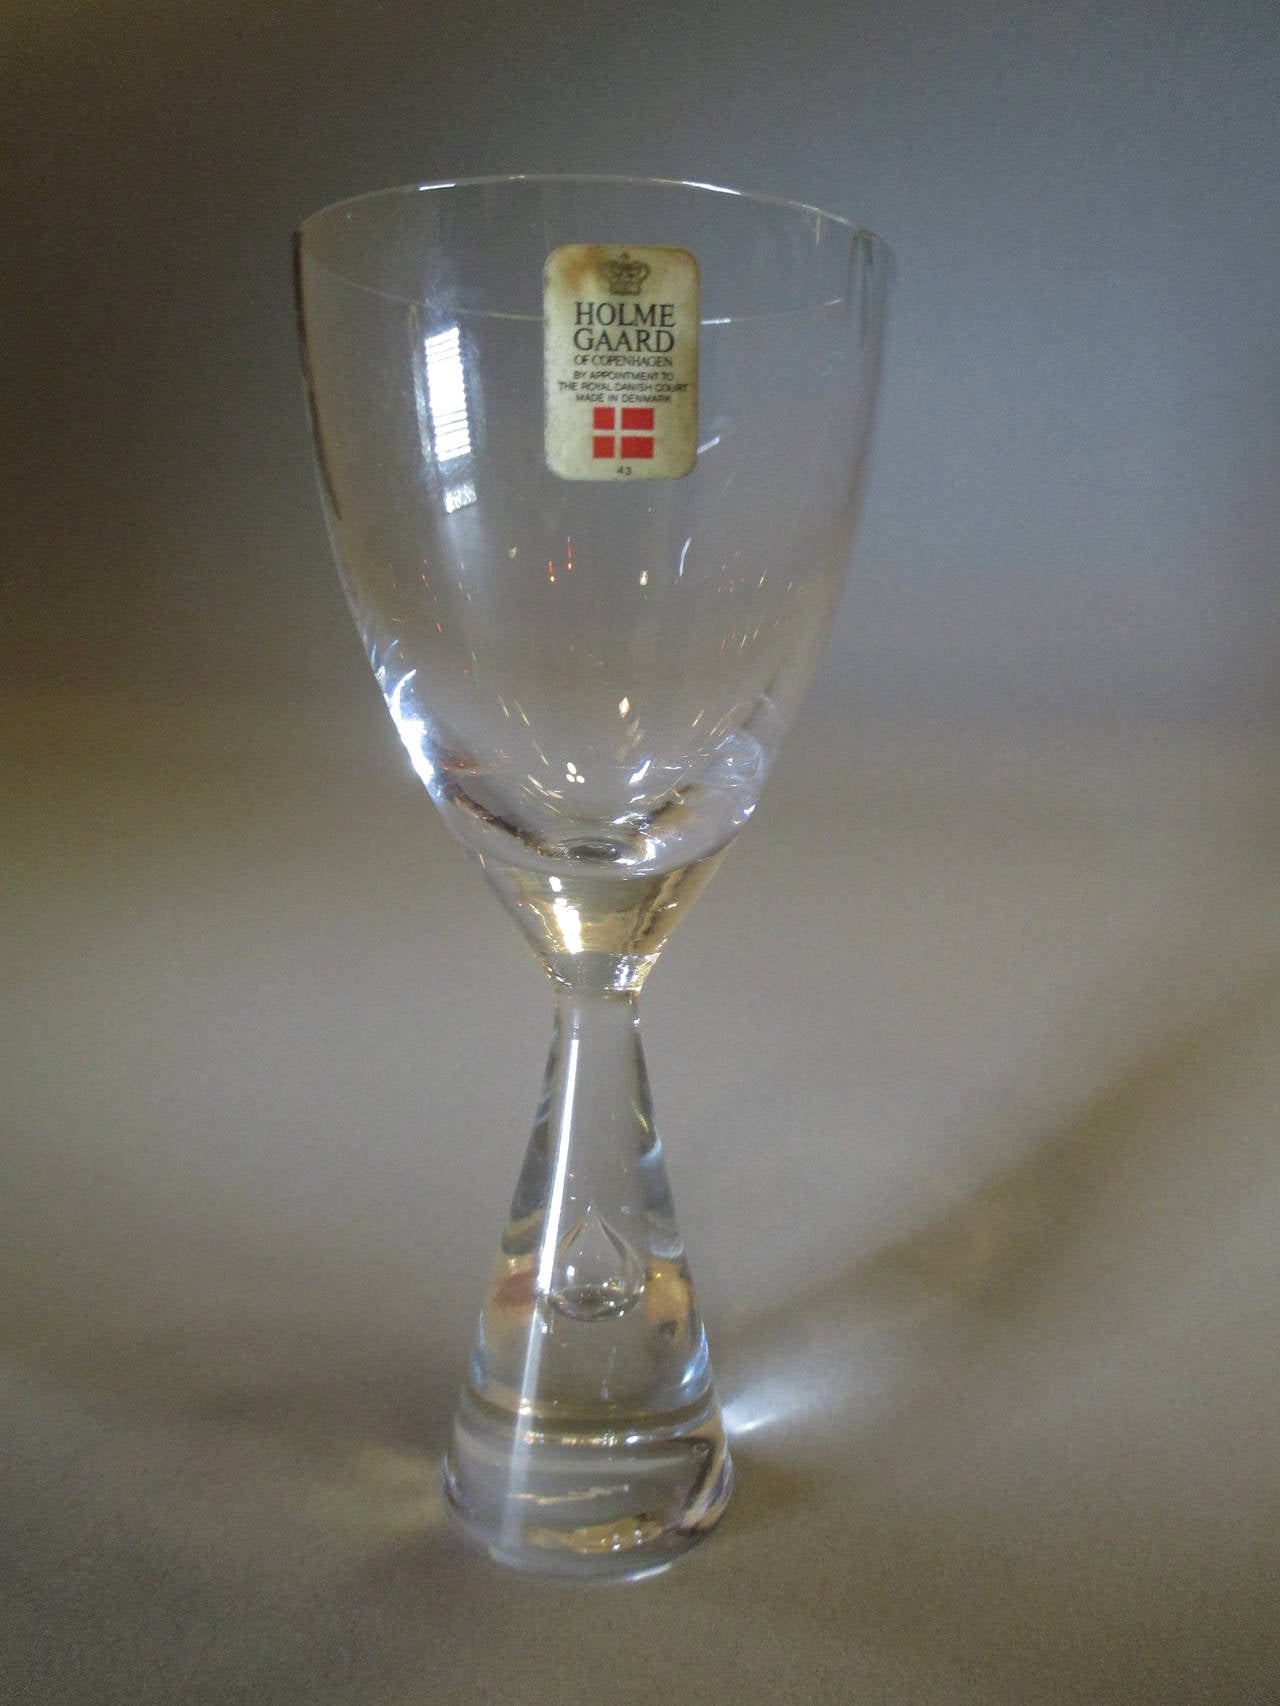 Danish Holmegaard Glasses Princess Collection from Denmark